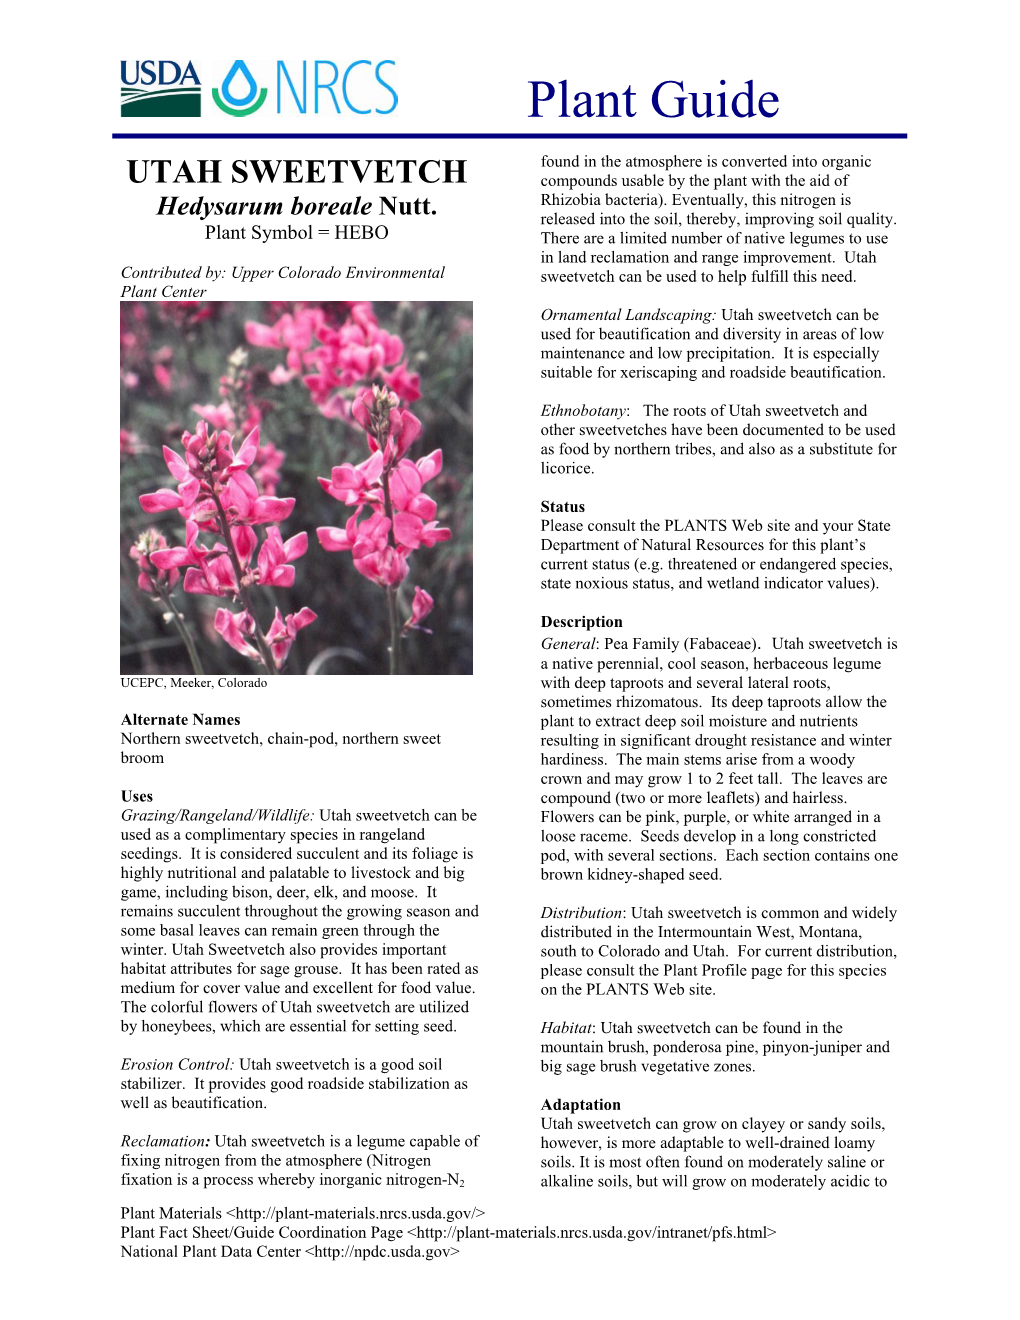 UTAH SWEETVETCH Compounds Usable by the Plant with the Aid of Rhizobia Bacteria)